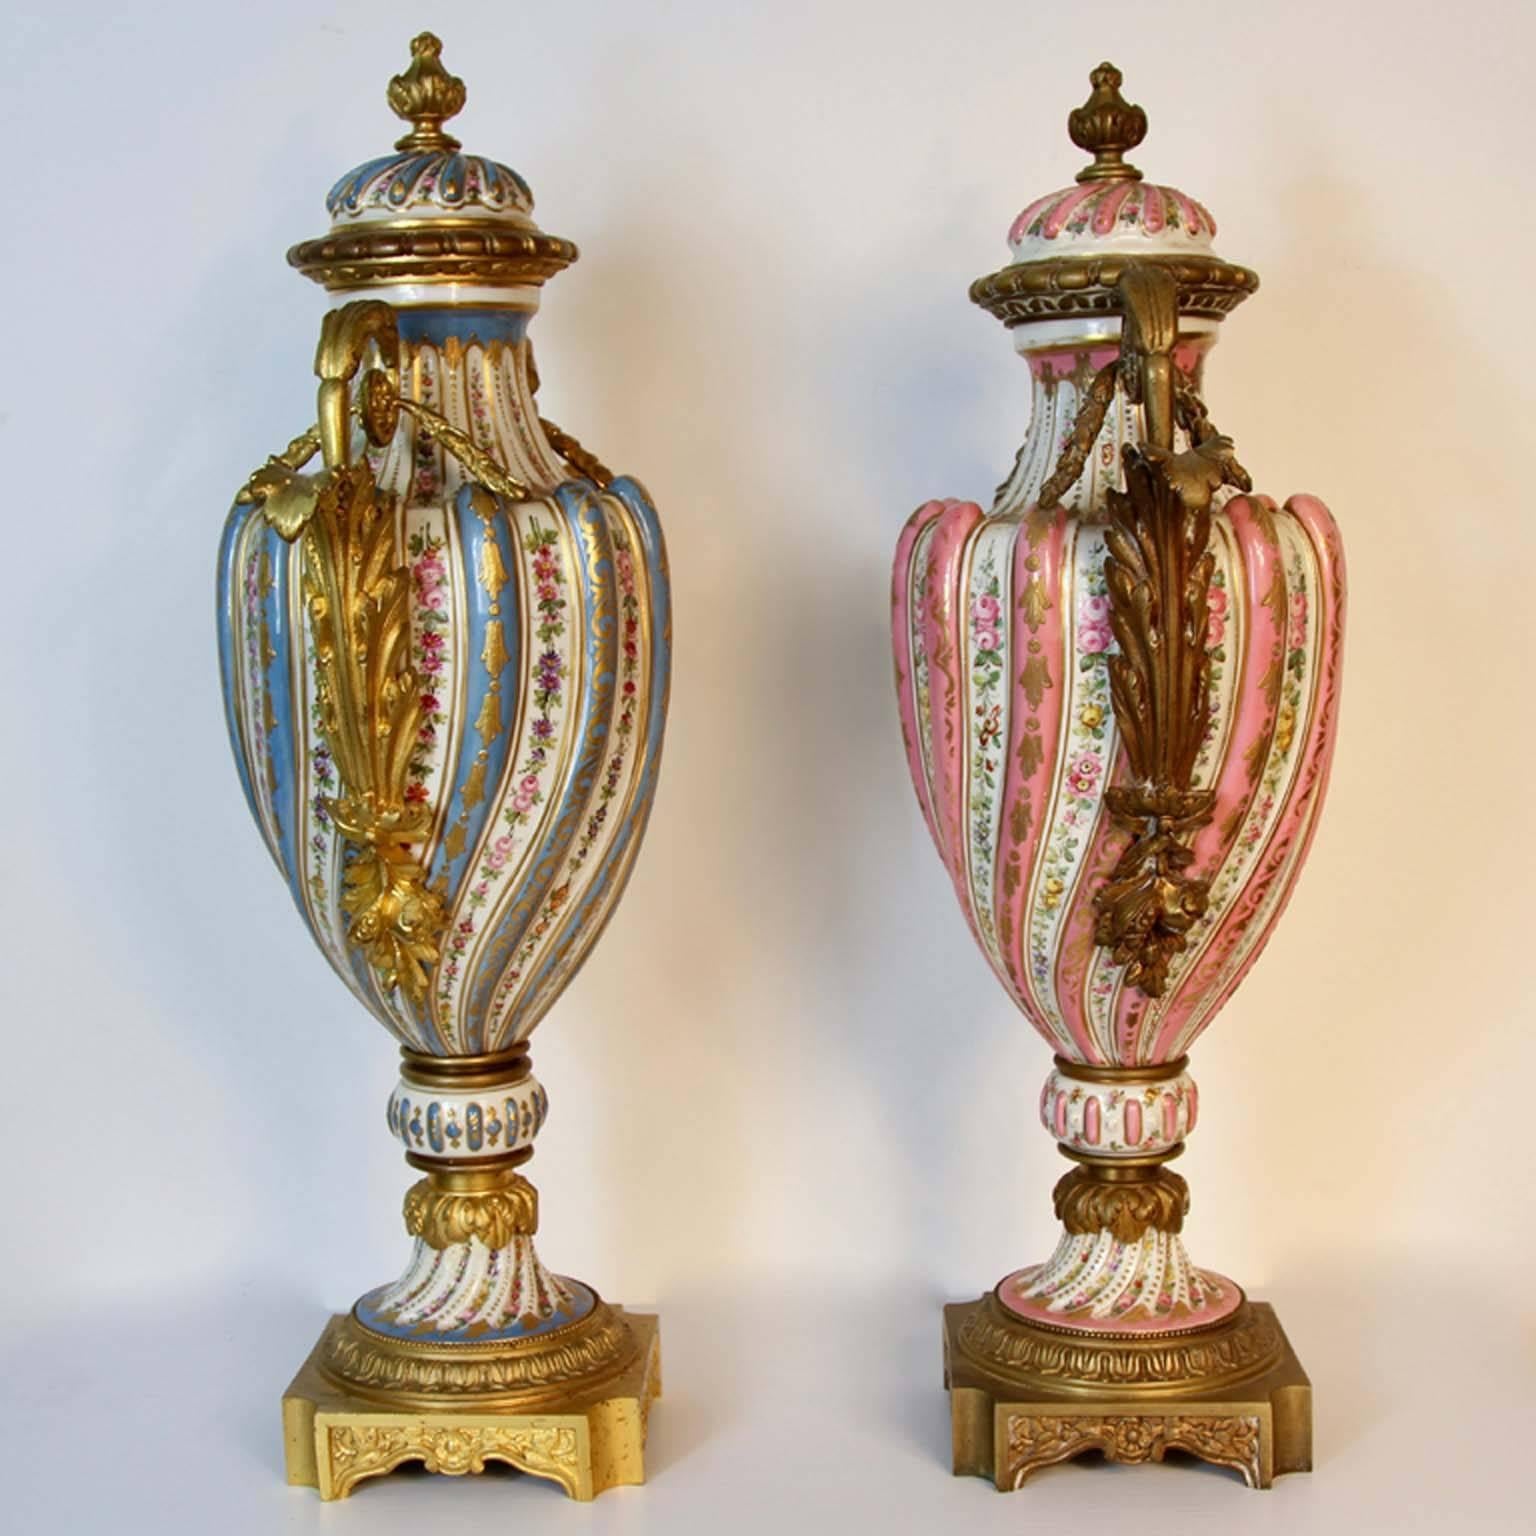 19th Century French Sevres Swirl Urns Pink and Celeste Blue In Good Condition For Sale In Bridport, CT